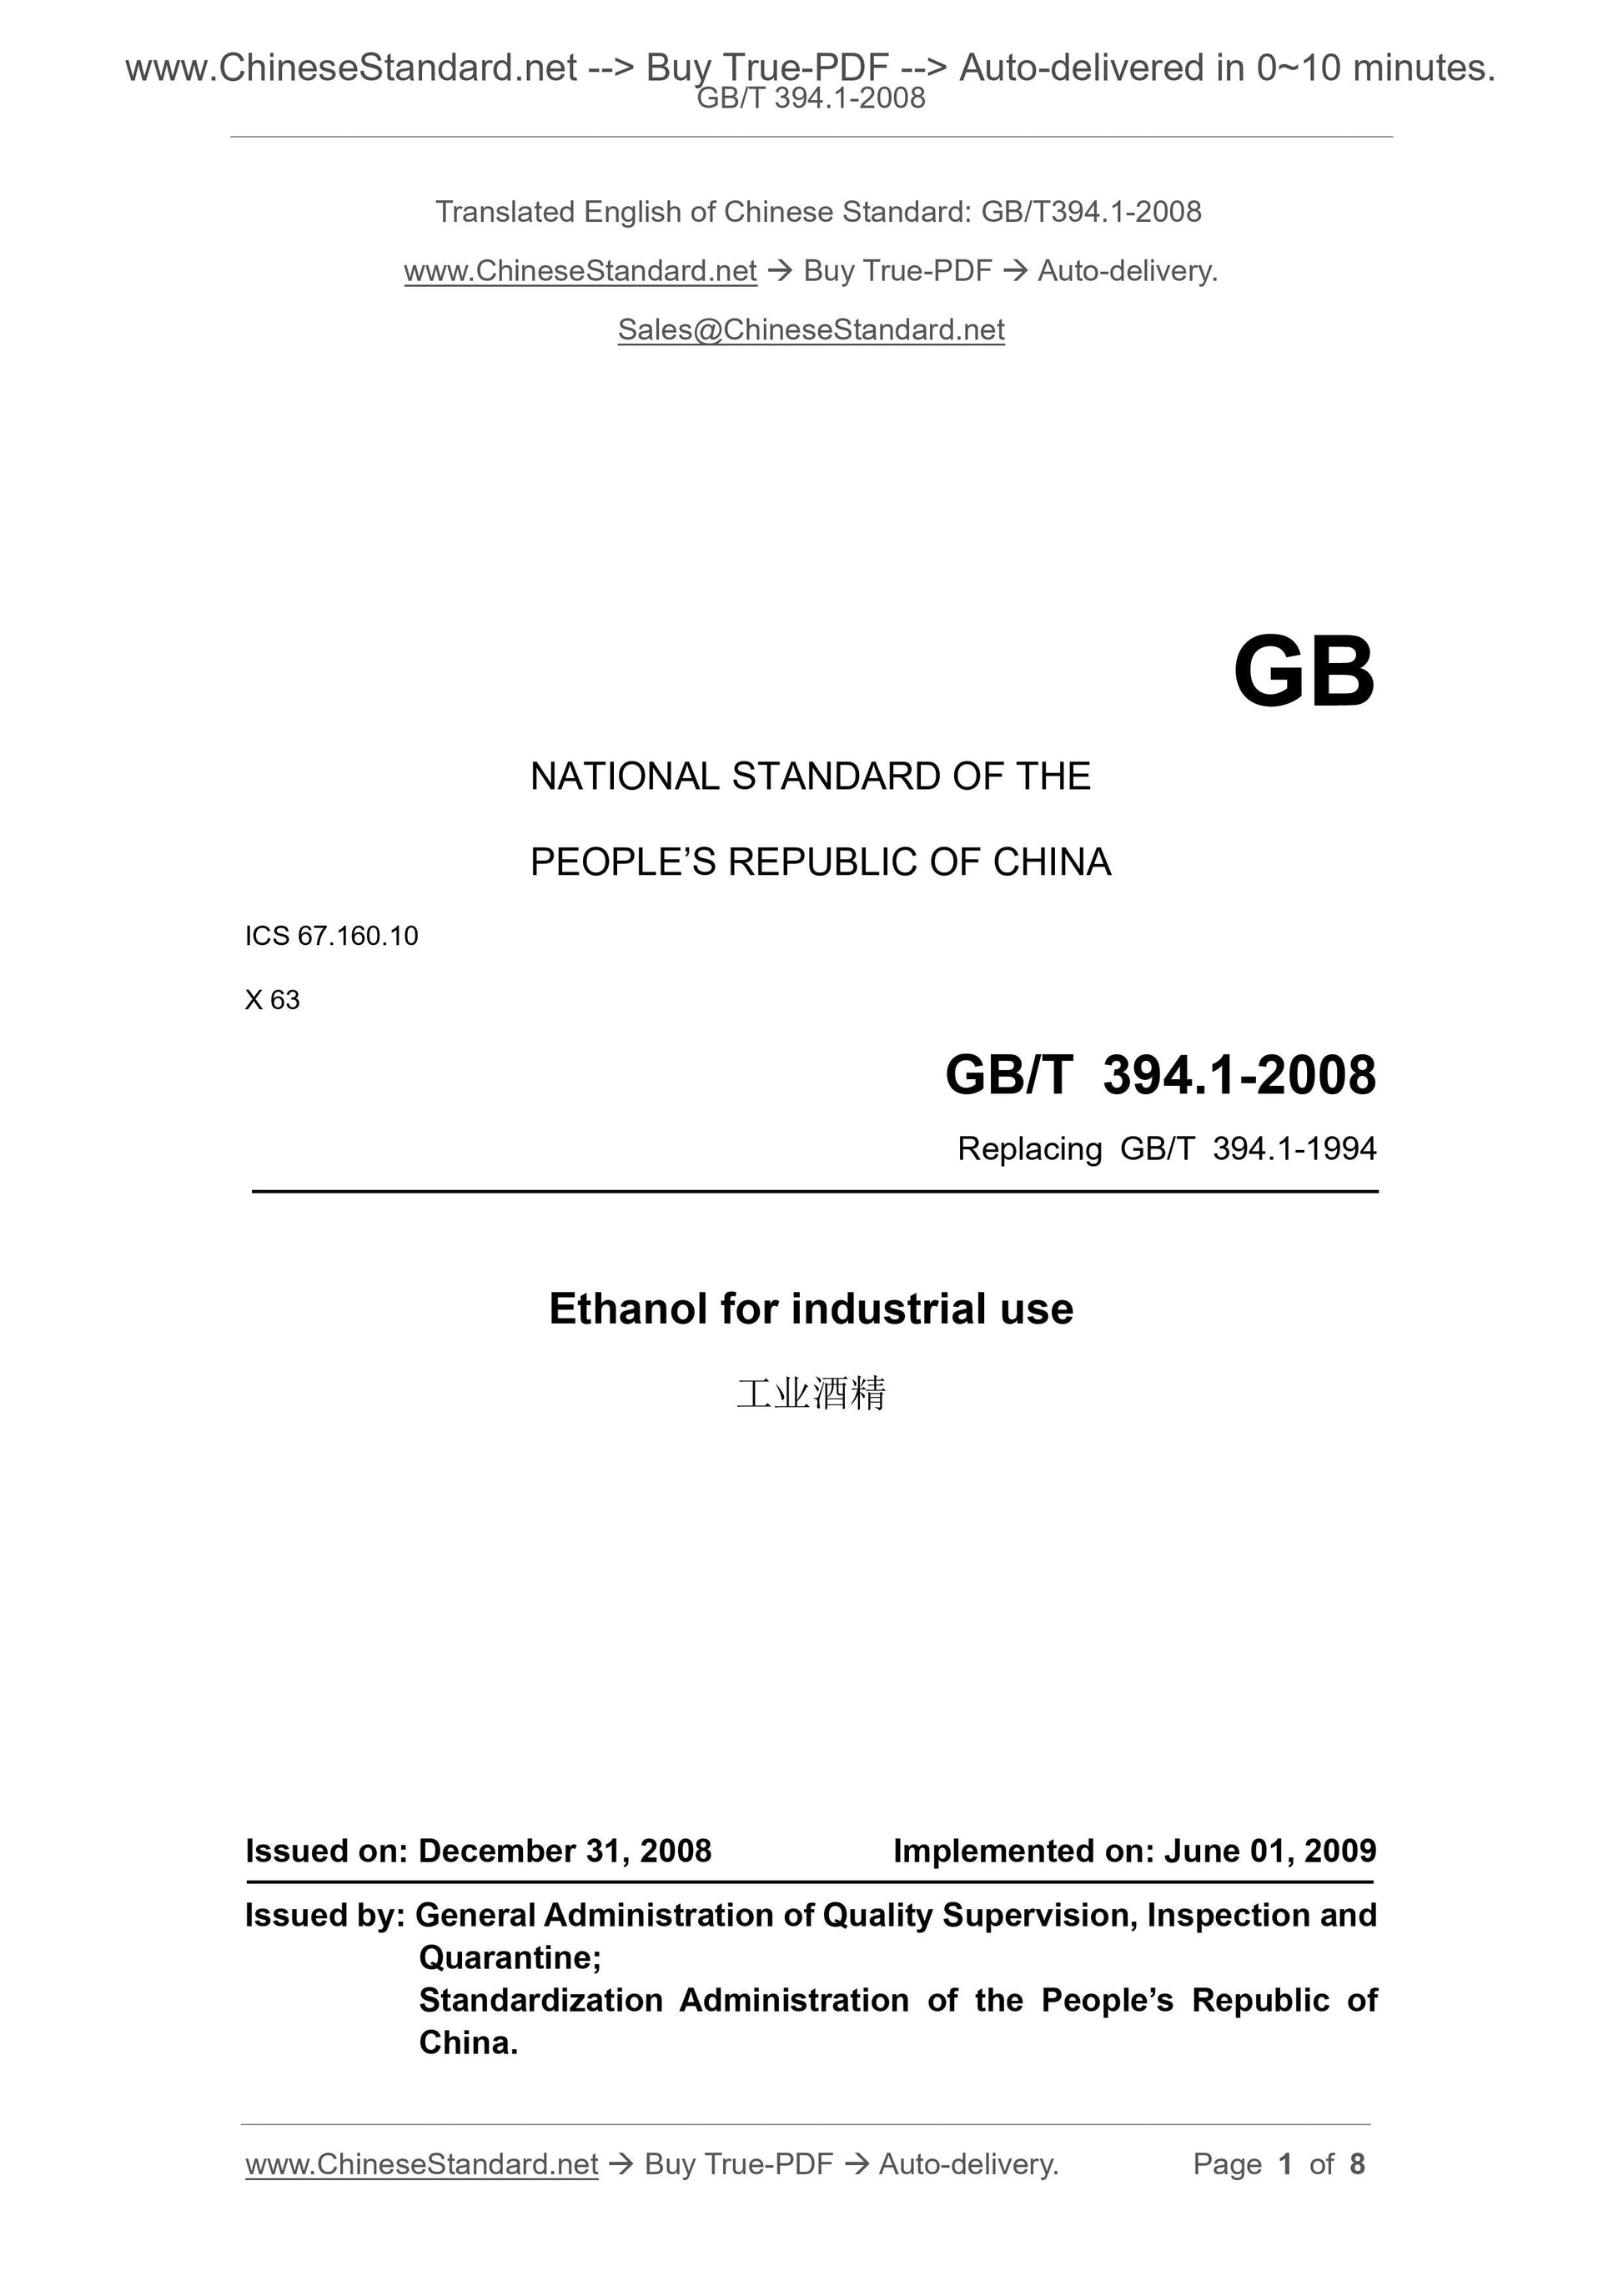 GB/T 394.1-2008 Page 1